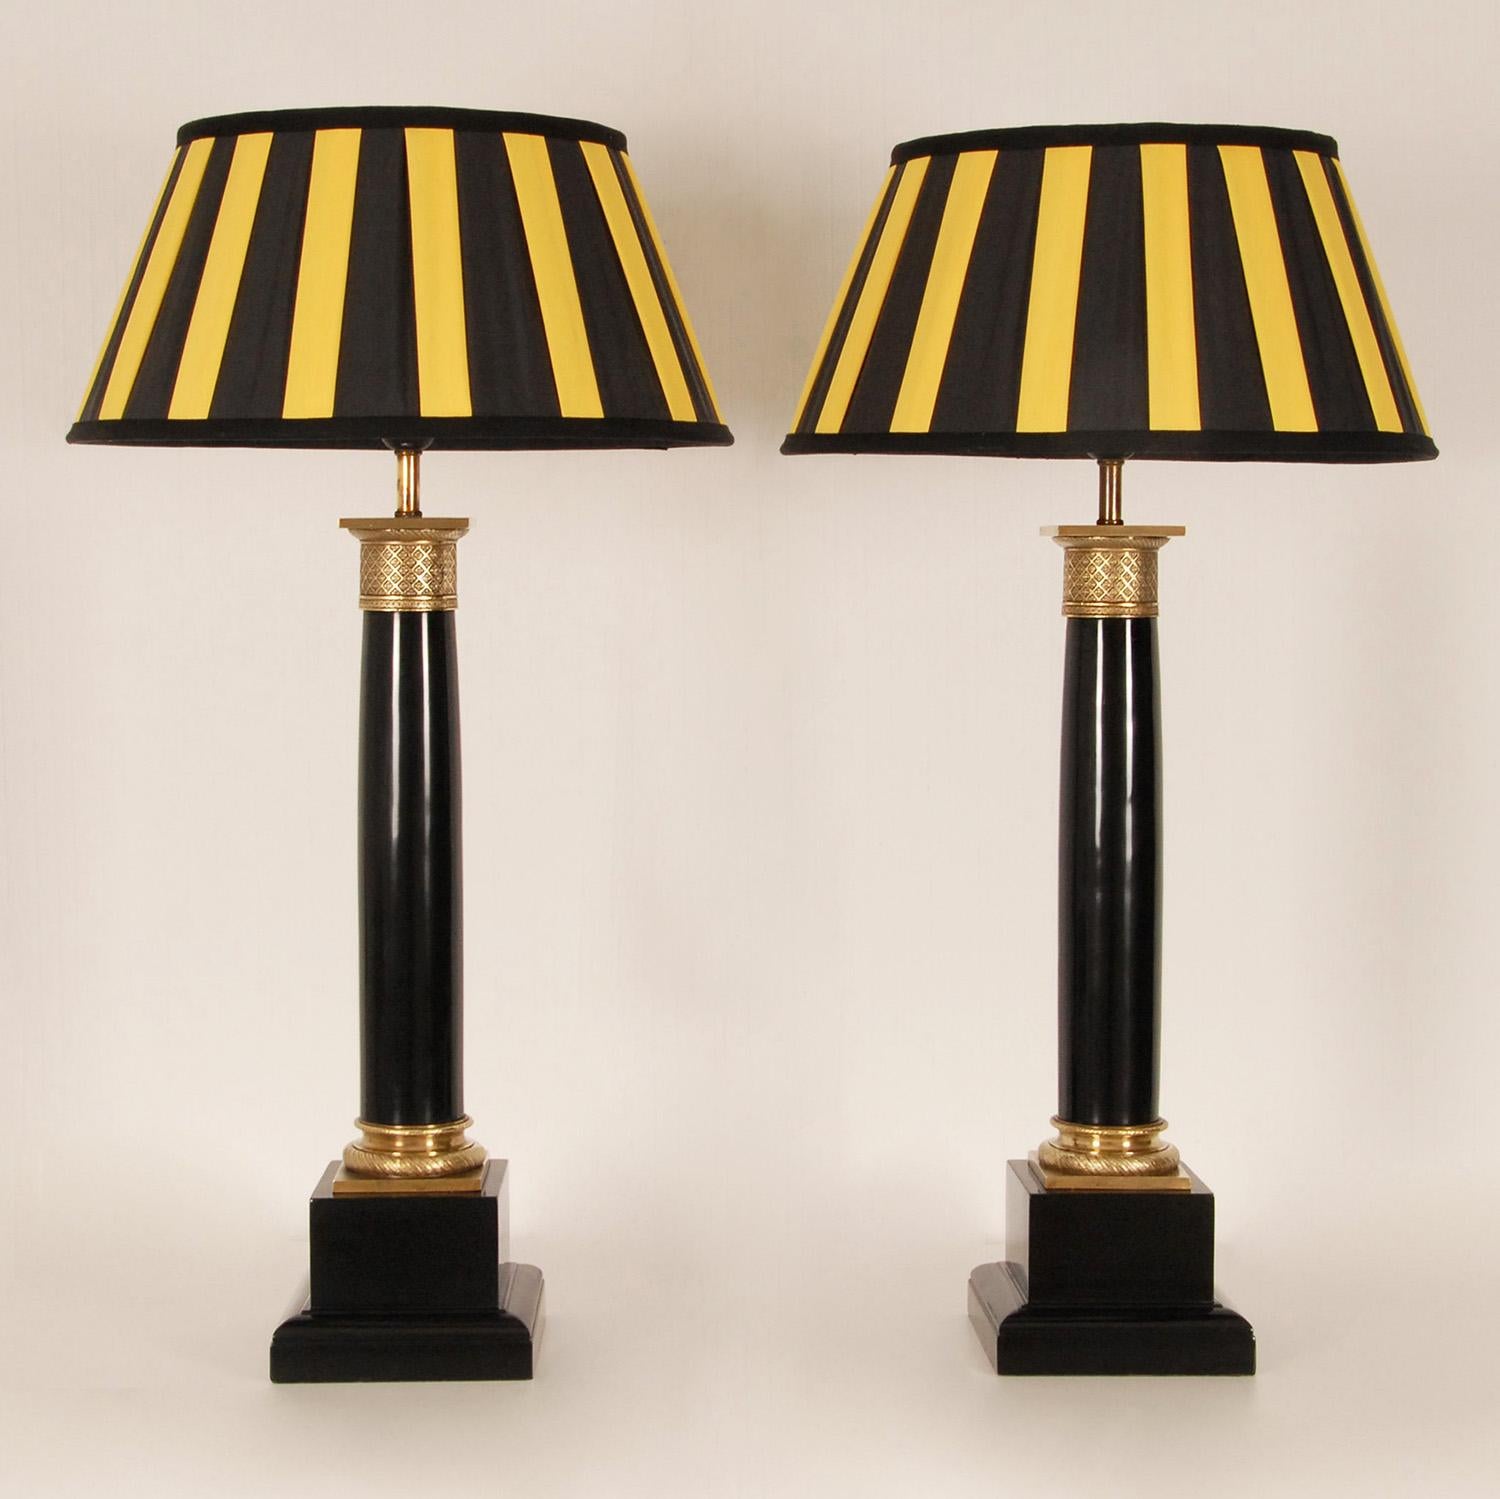 Very tall French gilt bronze and faux black marble table lamps
Design in the manner of Chapman, Frederick Cooper, Edward Caldwell, Henredon
Style Empire, Neoclassical, Napoleonic in the E. F. Caldwell style
Material: bronze and heavy solid acrylic